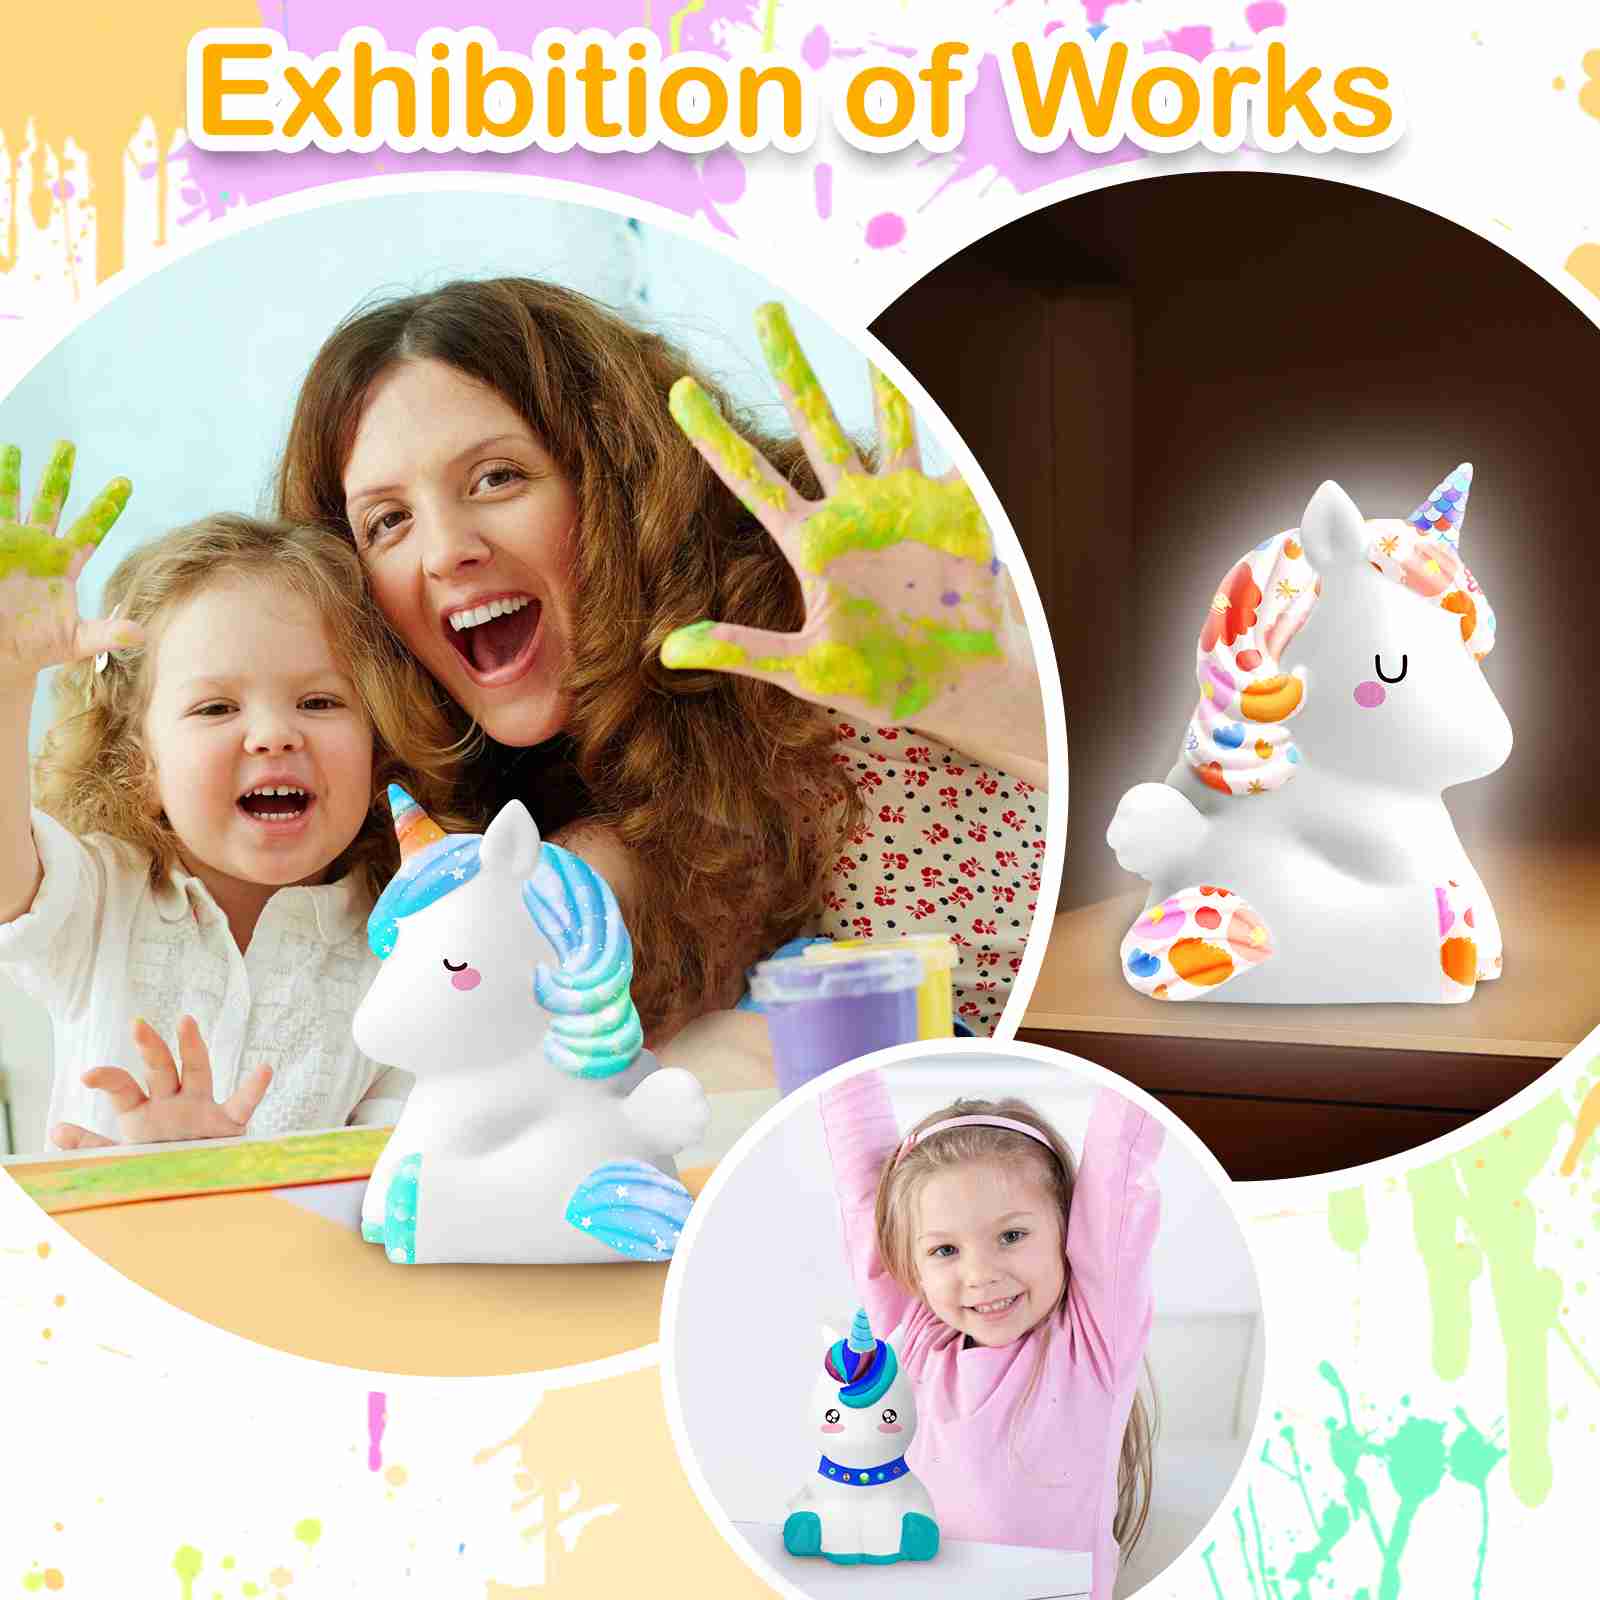 unicorn-toys-for-girls-crafts-for-kids-unicorn-night-light with discount code